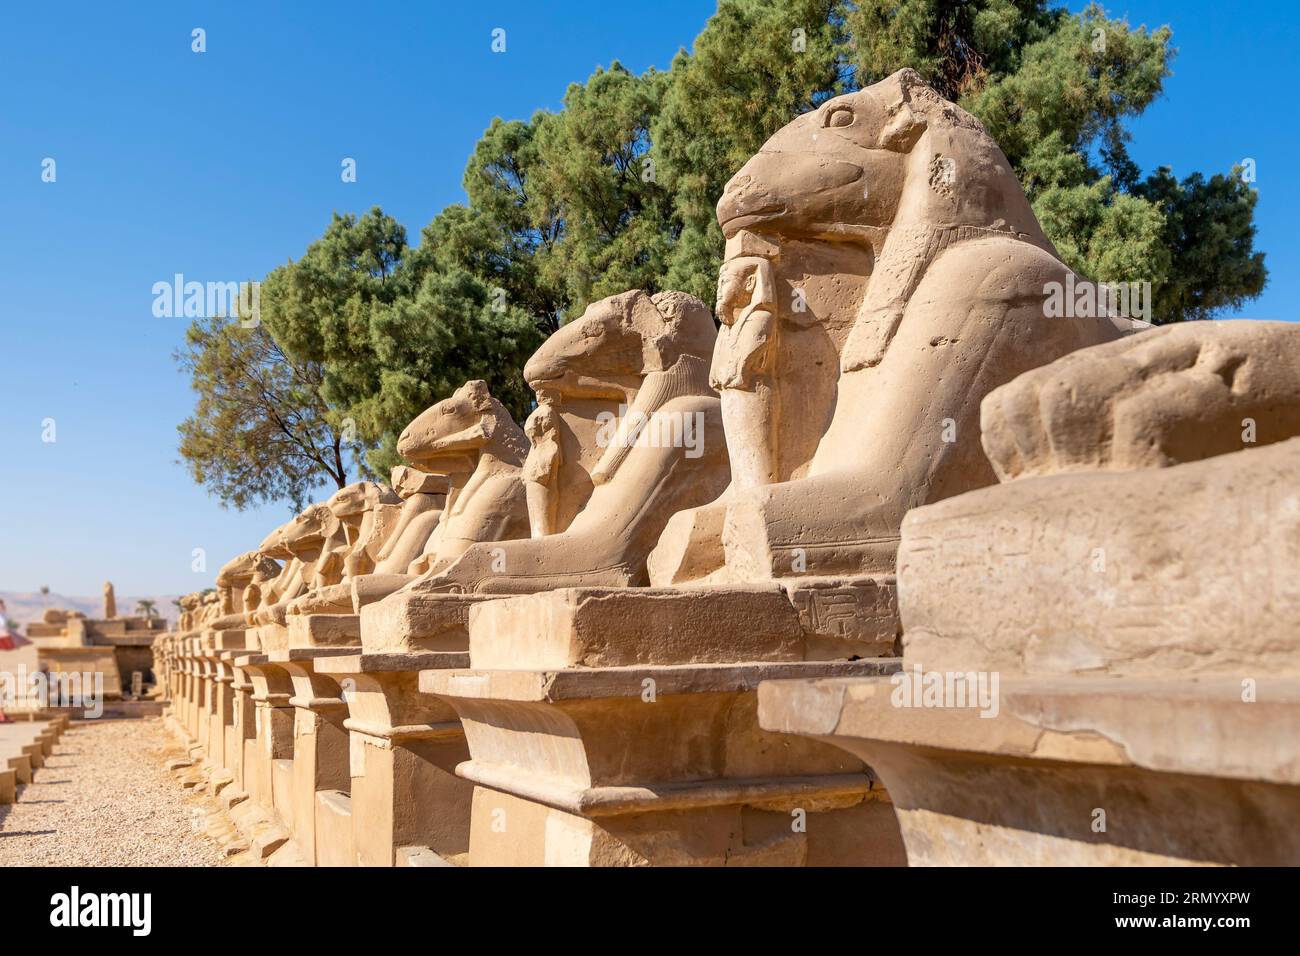 Avenue of Sphinxes or The King's Festivities Road, also known as Rams Road is a 2.7 km long avenue which connects Karnak Temple with Luxor Temple. Stock Photo